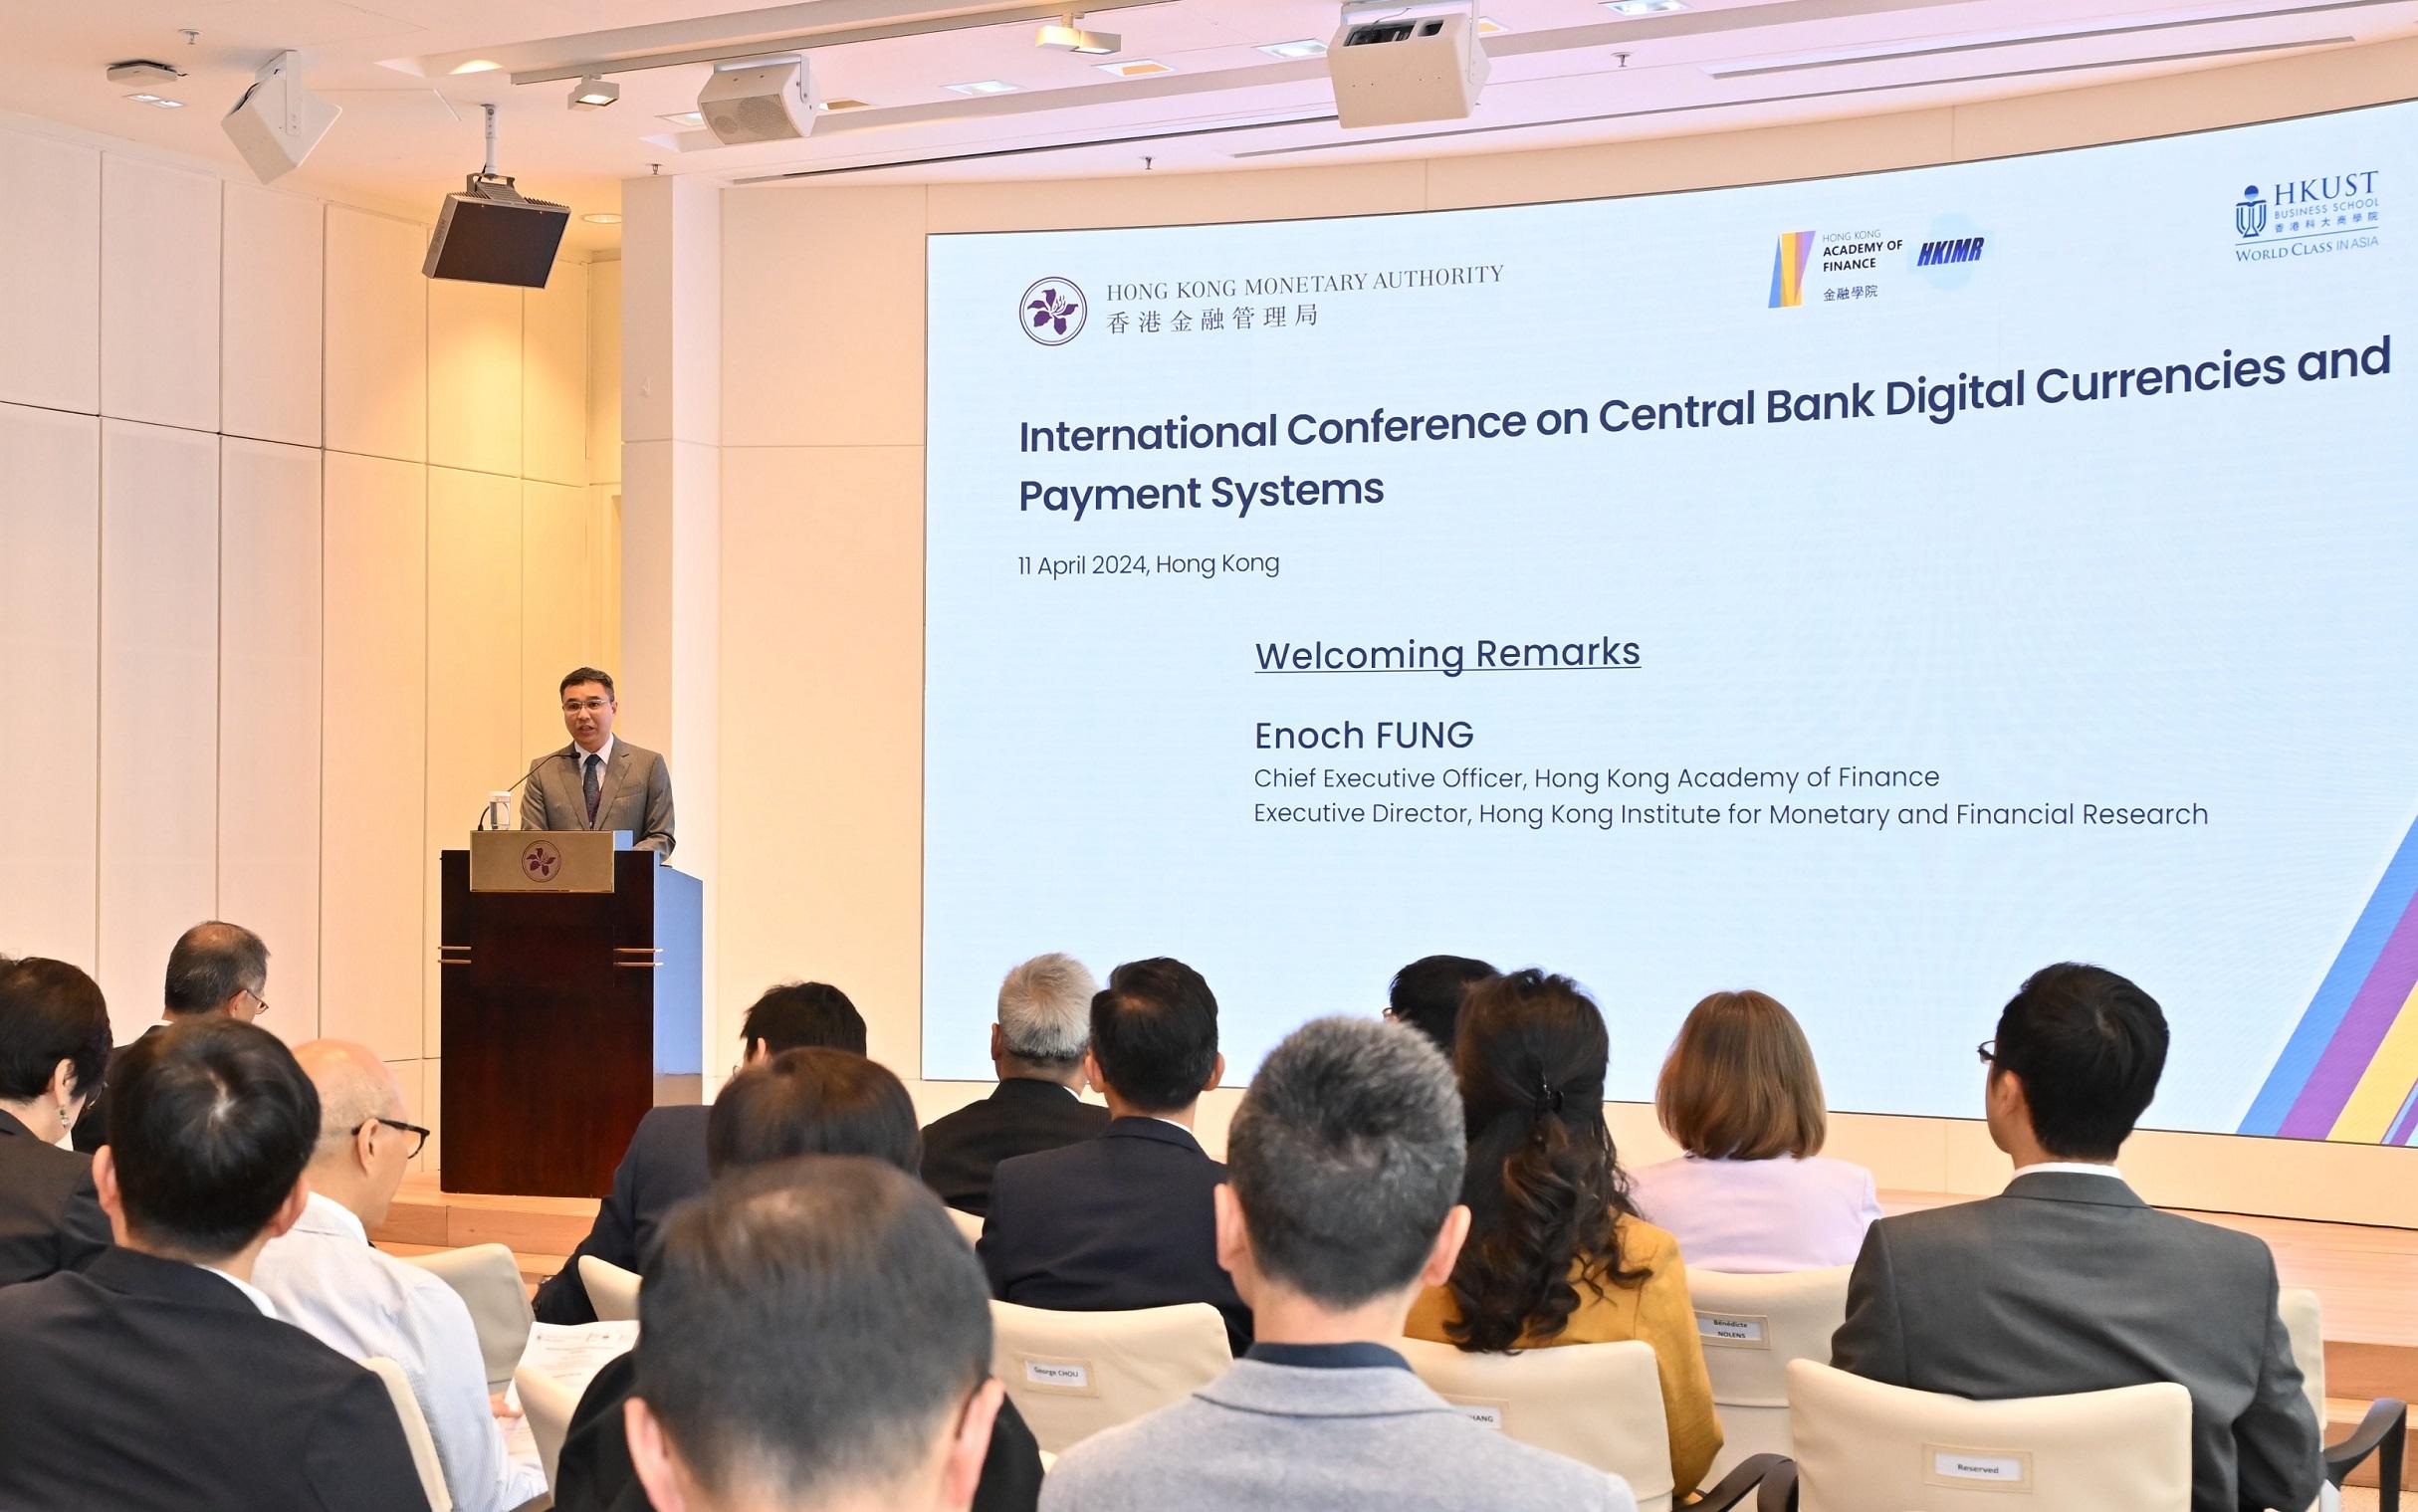 The Chief Executive Officer of the Hong Kong Academy of Finance and Executive Director of the Hong Kong Institute for Monetary and Financial Research, Mr Enoch Fung, delivers welcoming remarks at the International Conference on Central Bank Digital Currencies and Payment Systems.